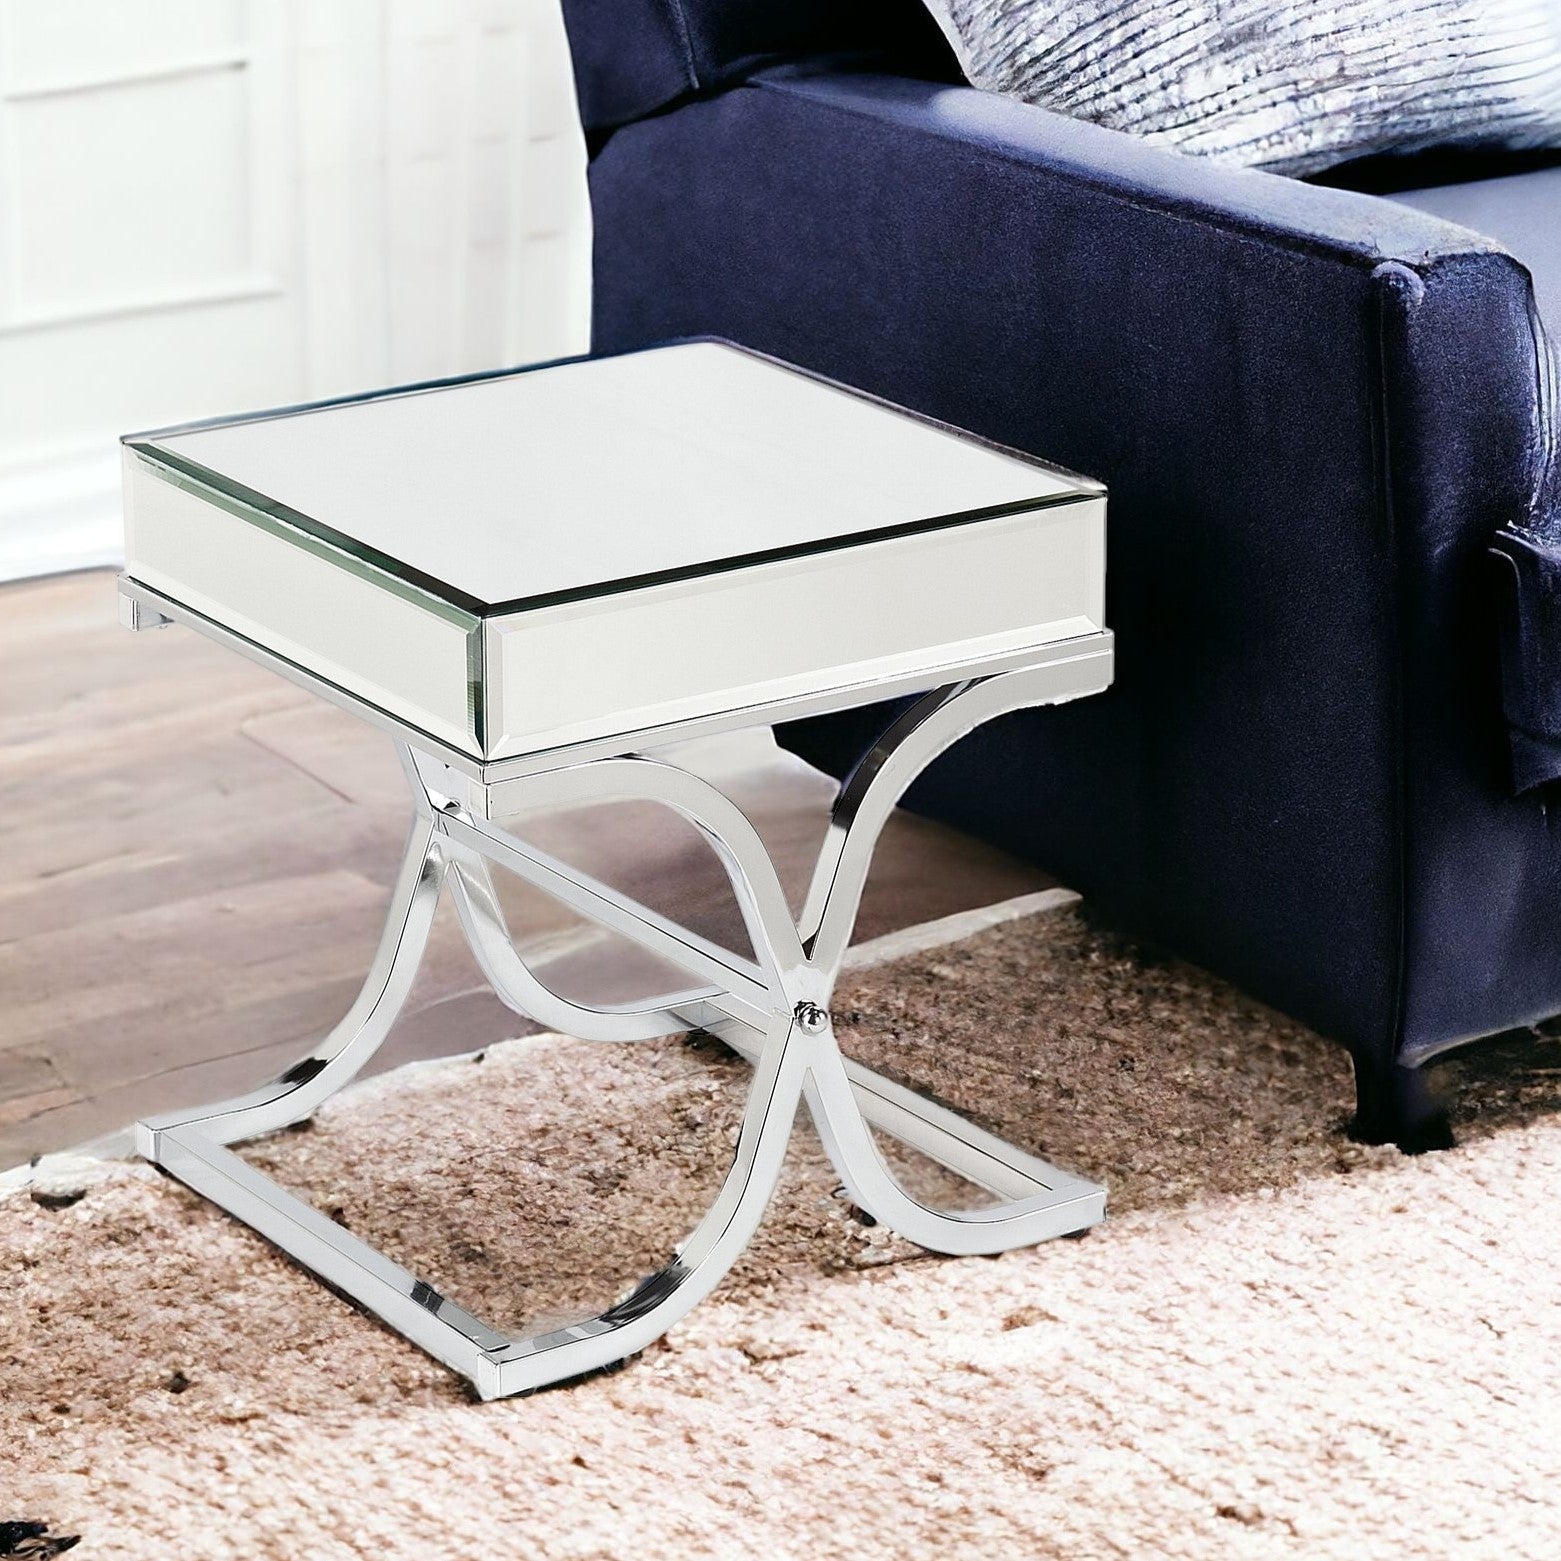 22" Silver Glass Square End Table